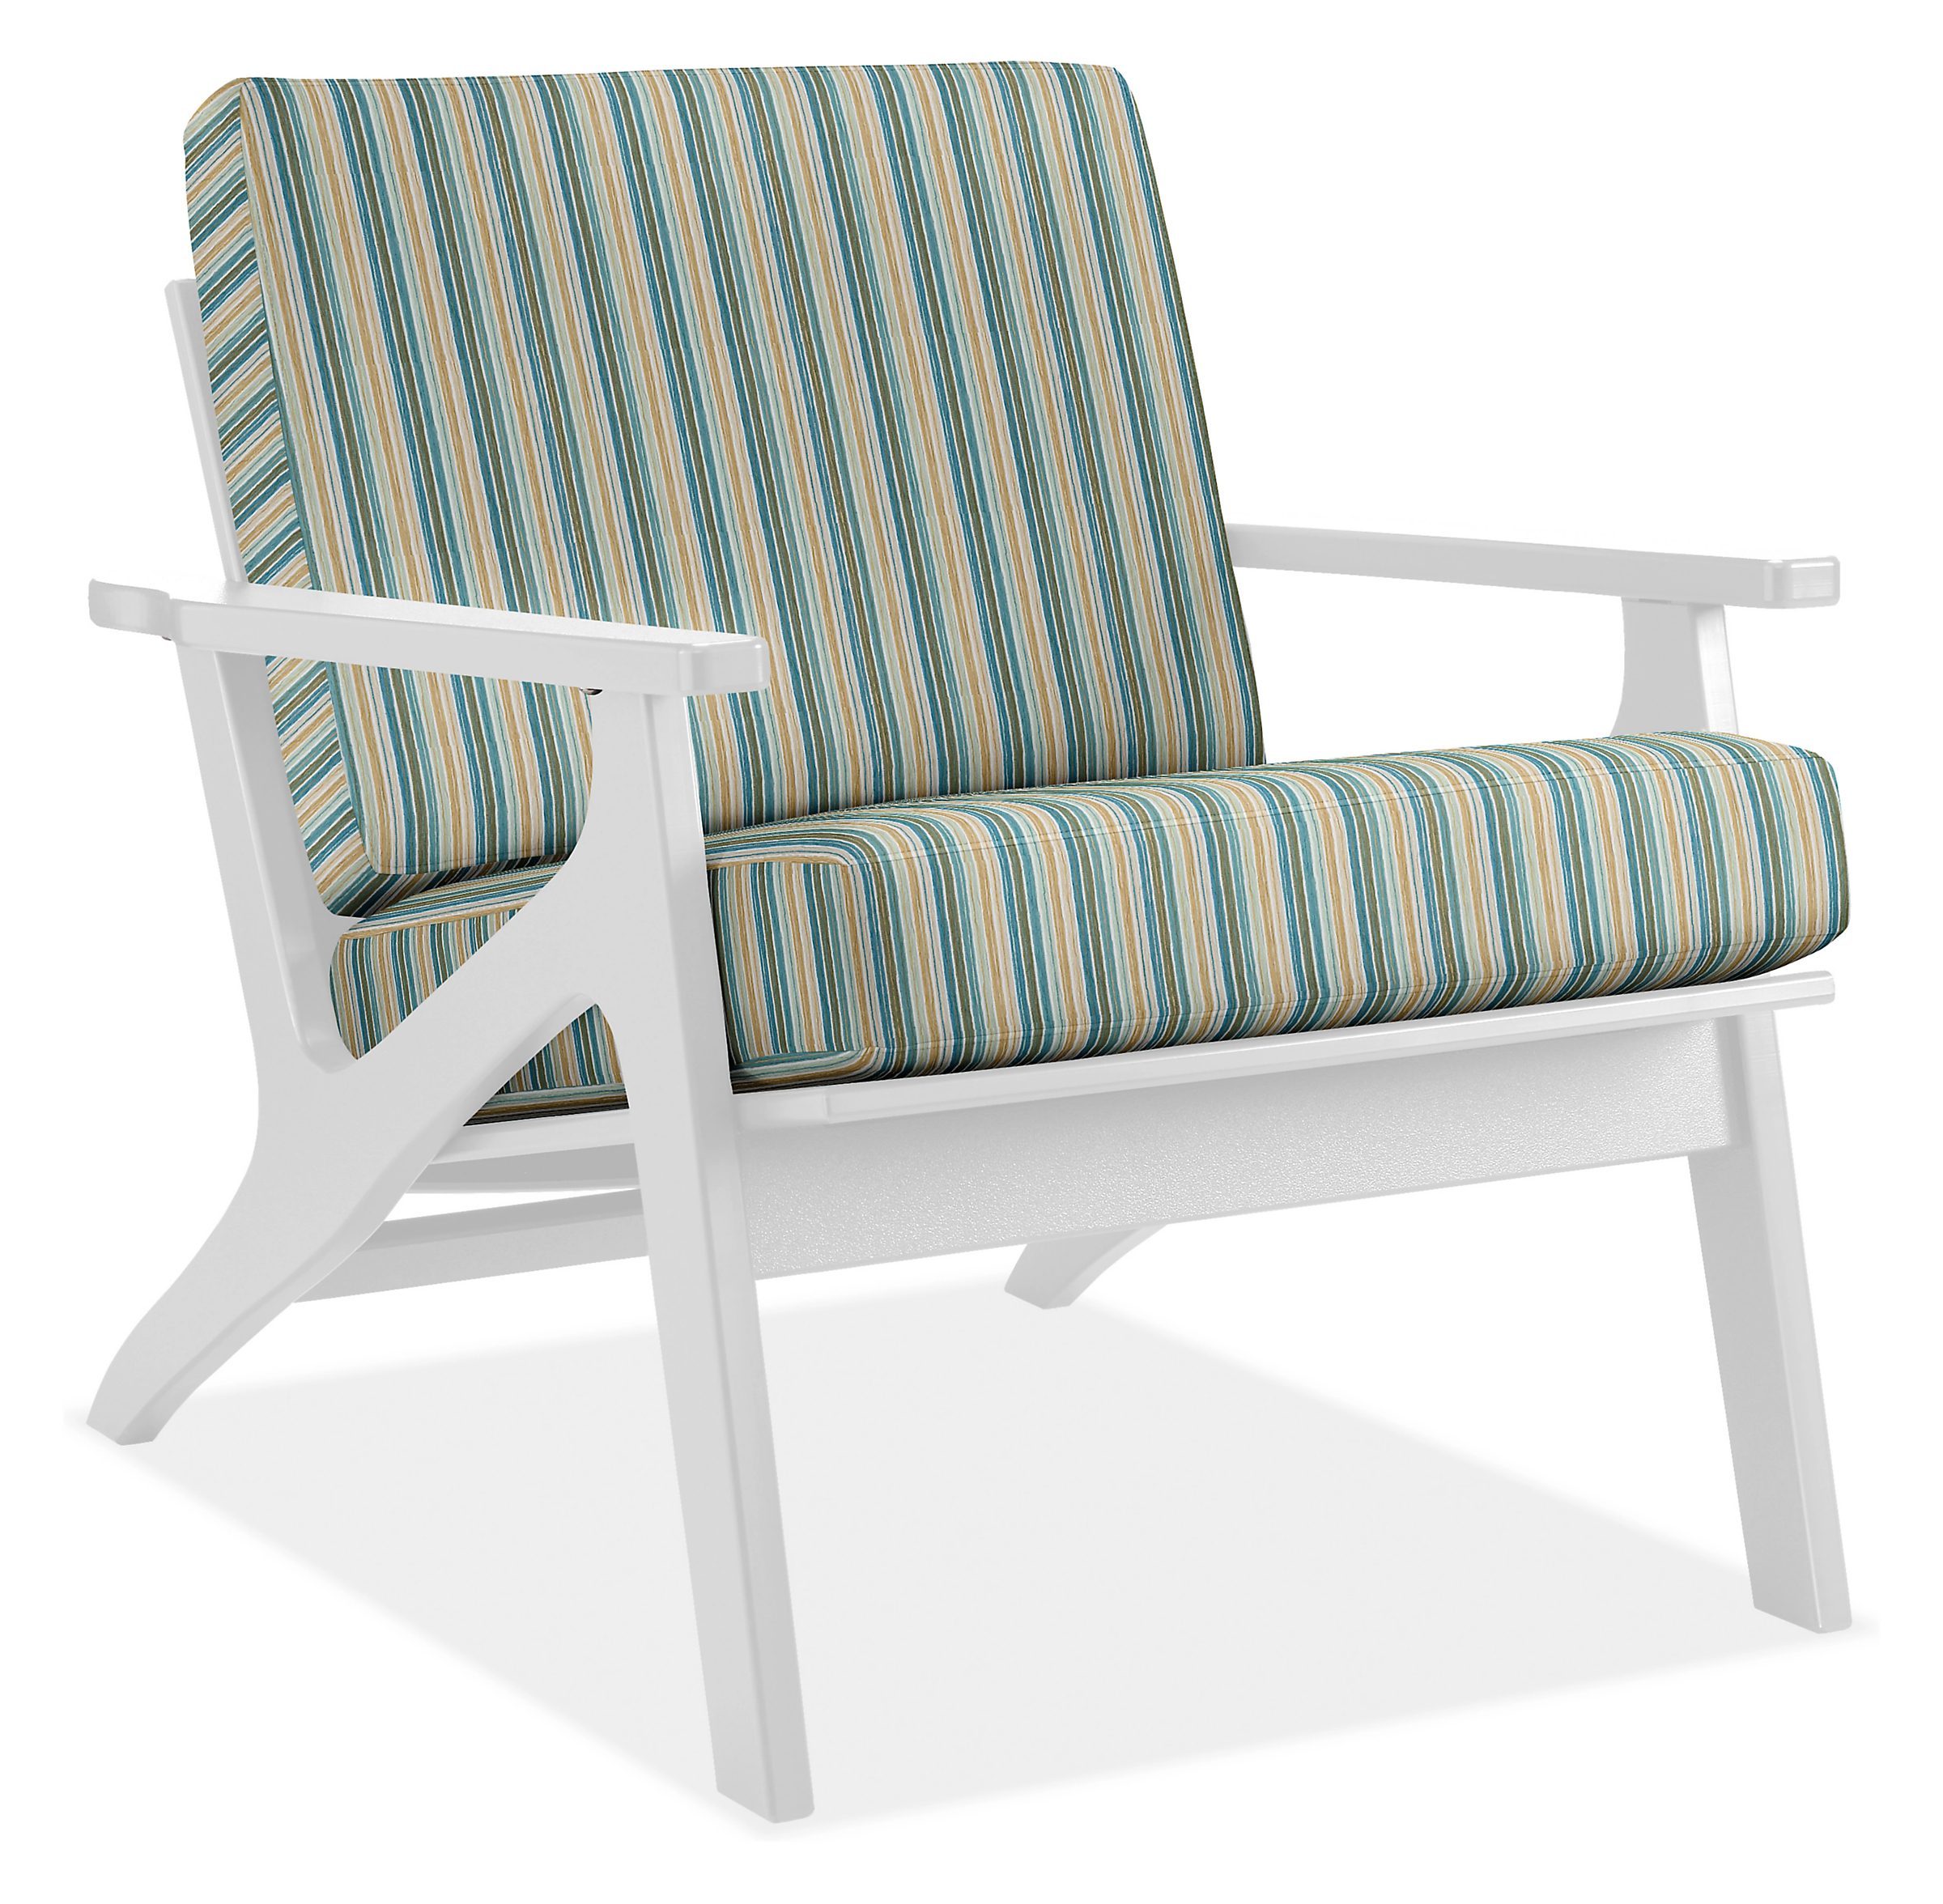 Breeze Chair in Vinna Teal with White HDPE Frame